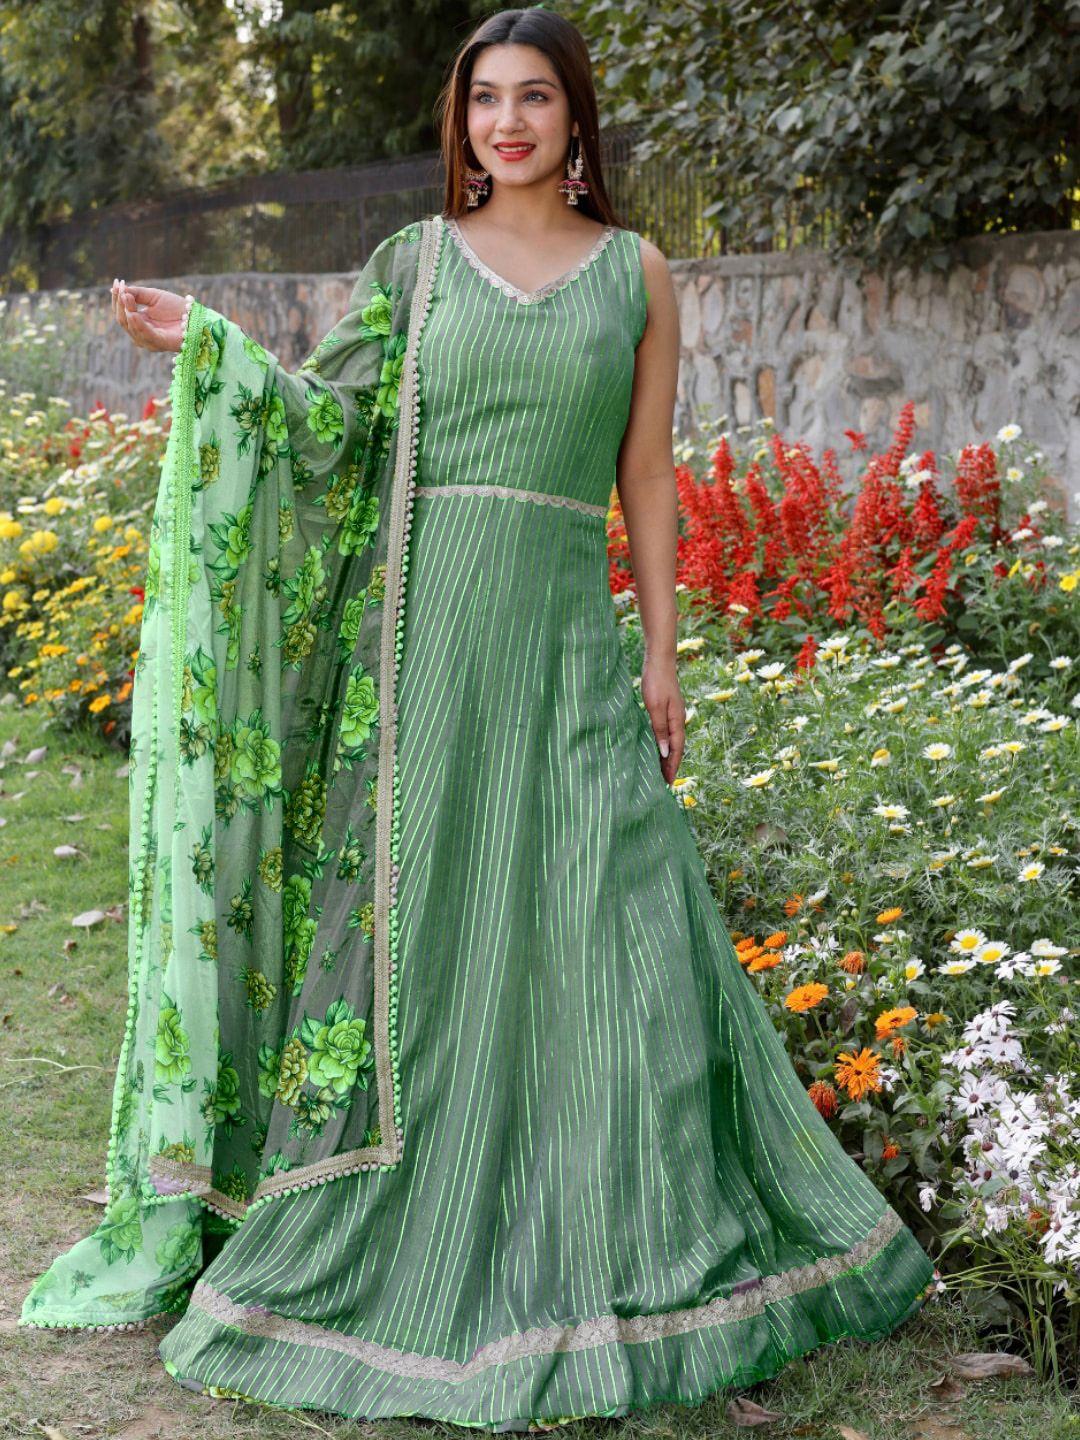 chhabra-555-green-striped-flared-gown-with-floral-digital-printed-dupatta